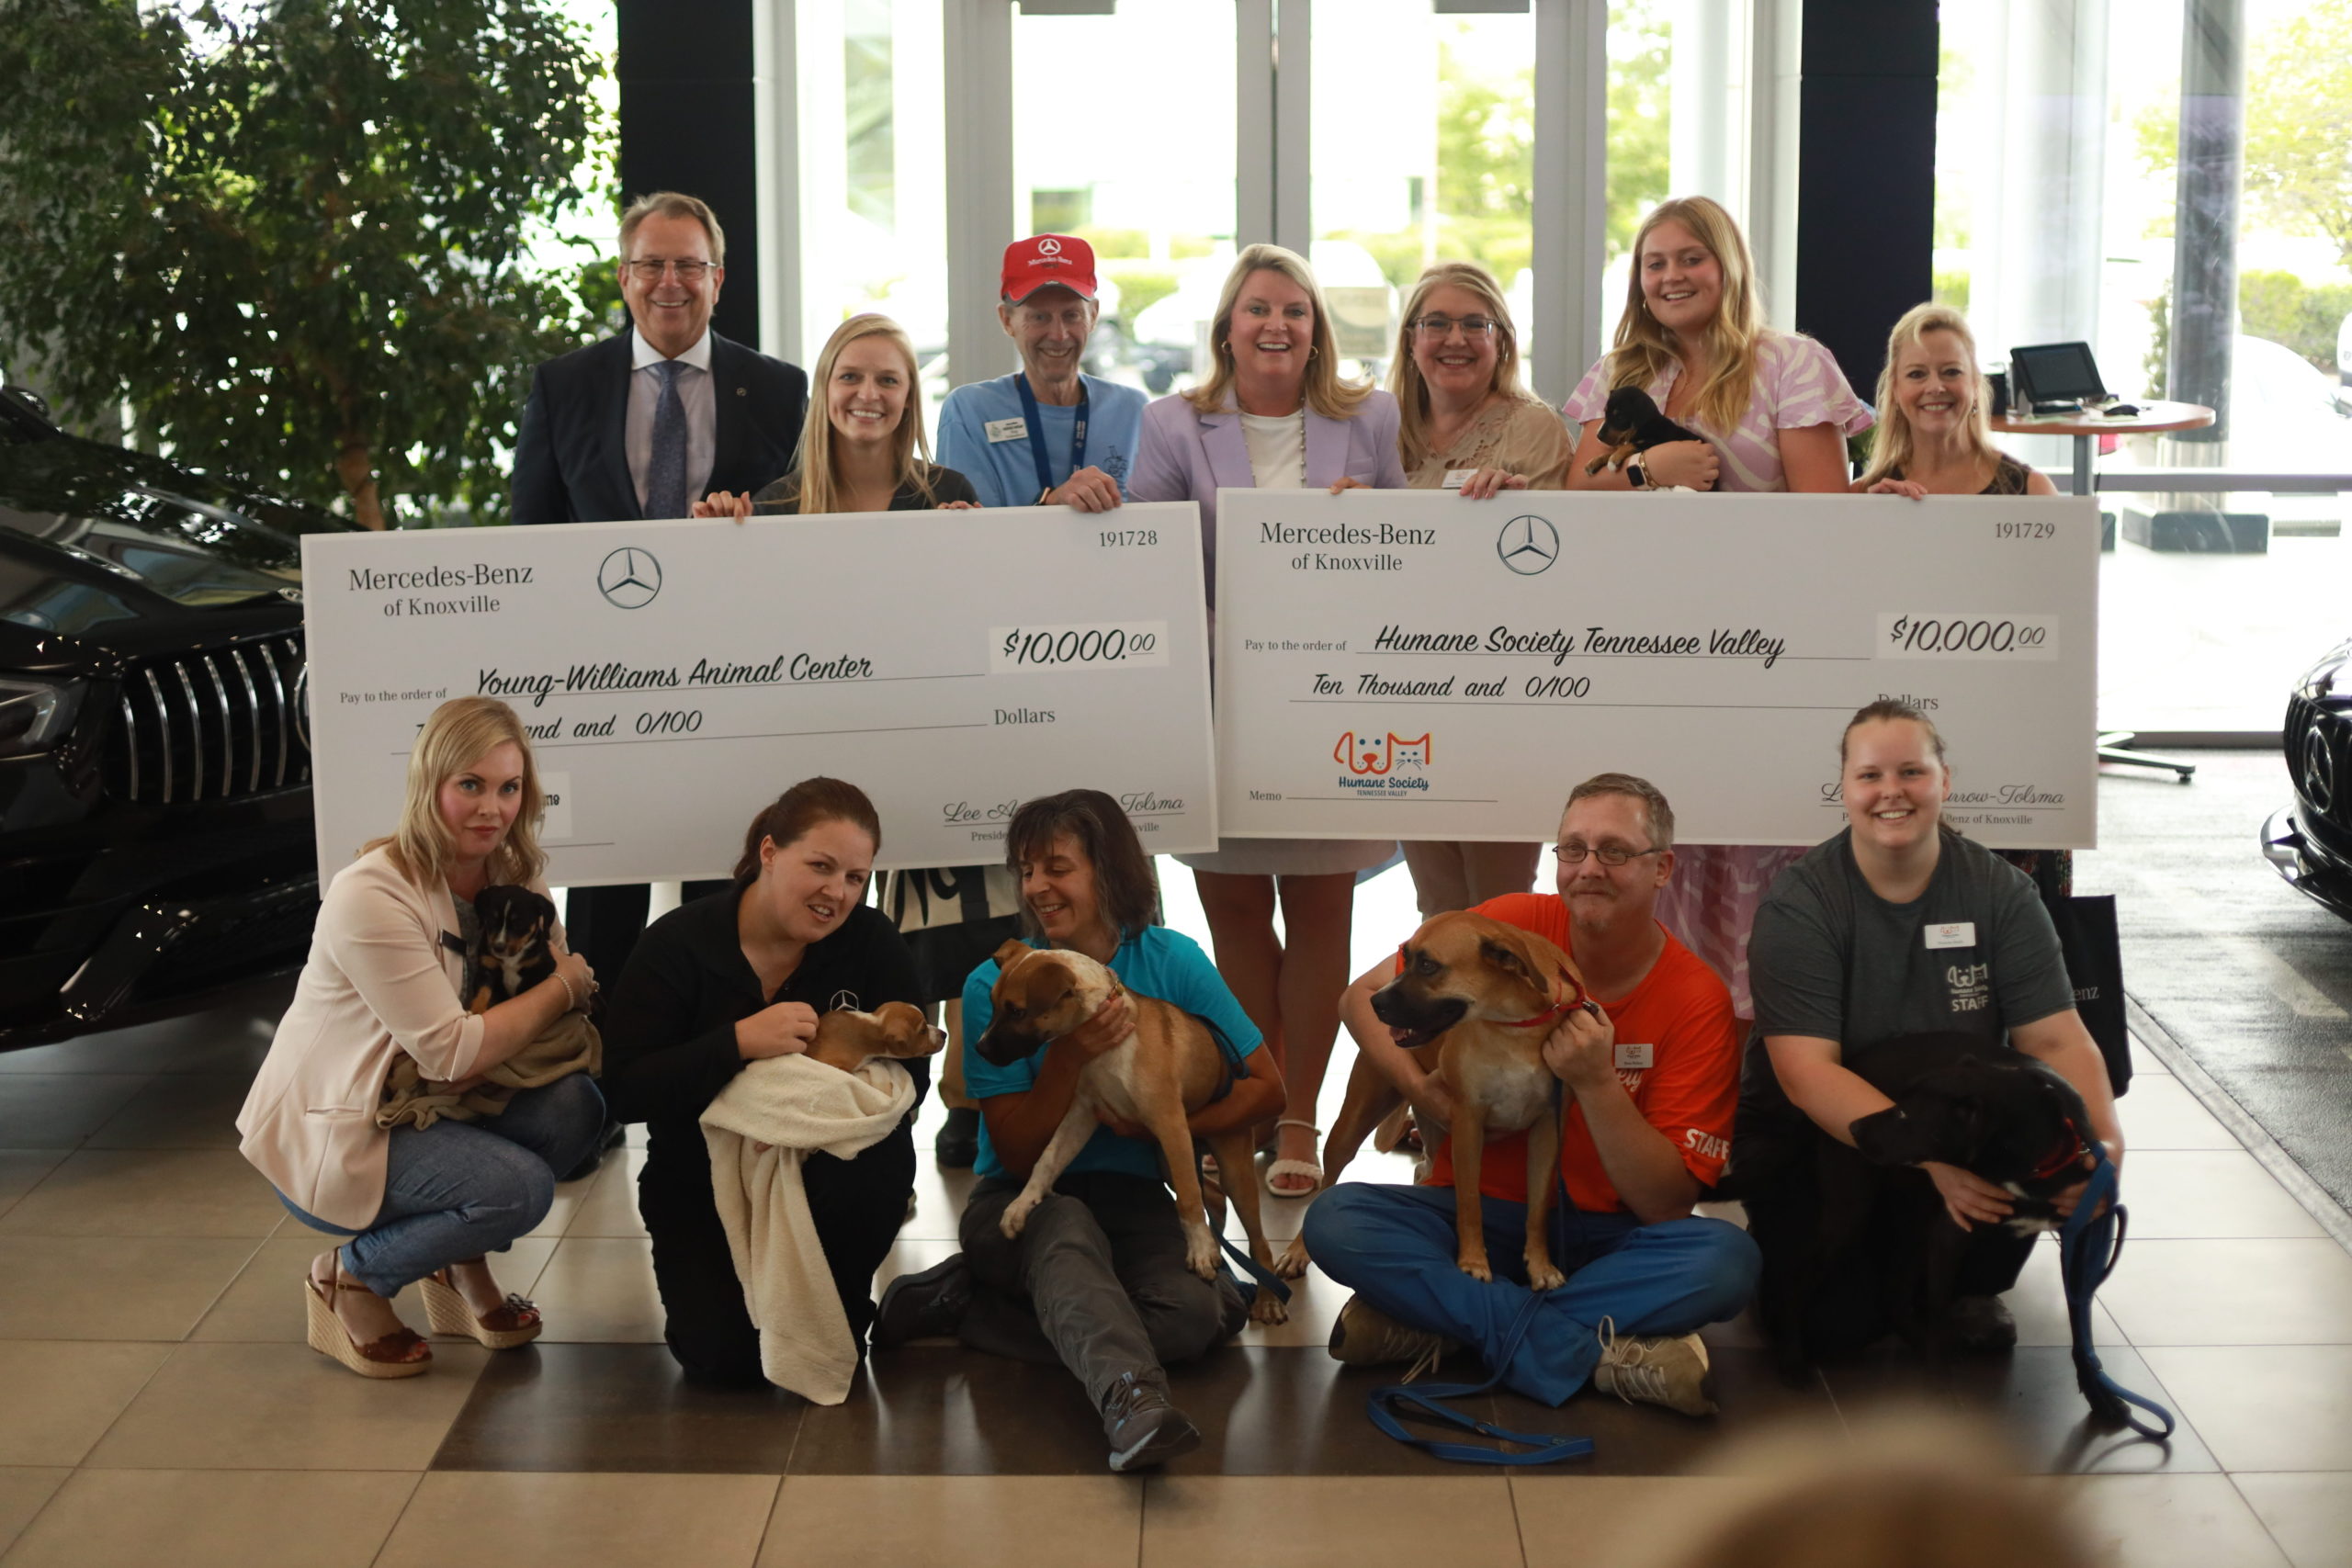 Featured image for “Furrow Automotive Group’s Mercedes-Benz of Knoxville donates $20K to help homeless pets”